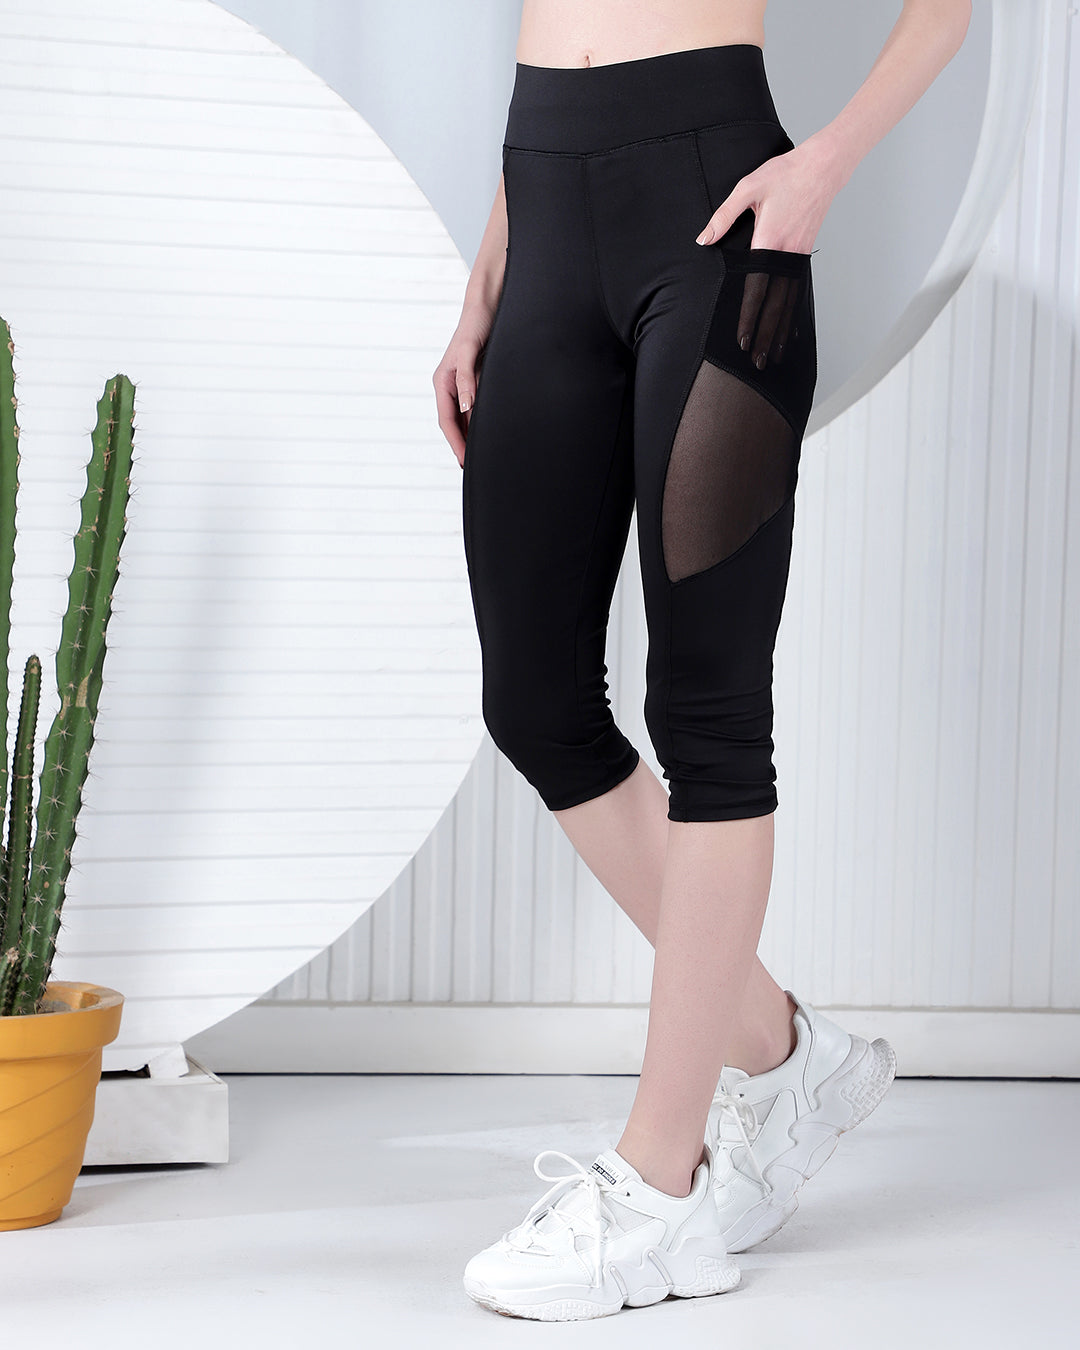 High Waisted Contrast Mesh Sports Leggings With Phone Pocket